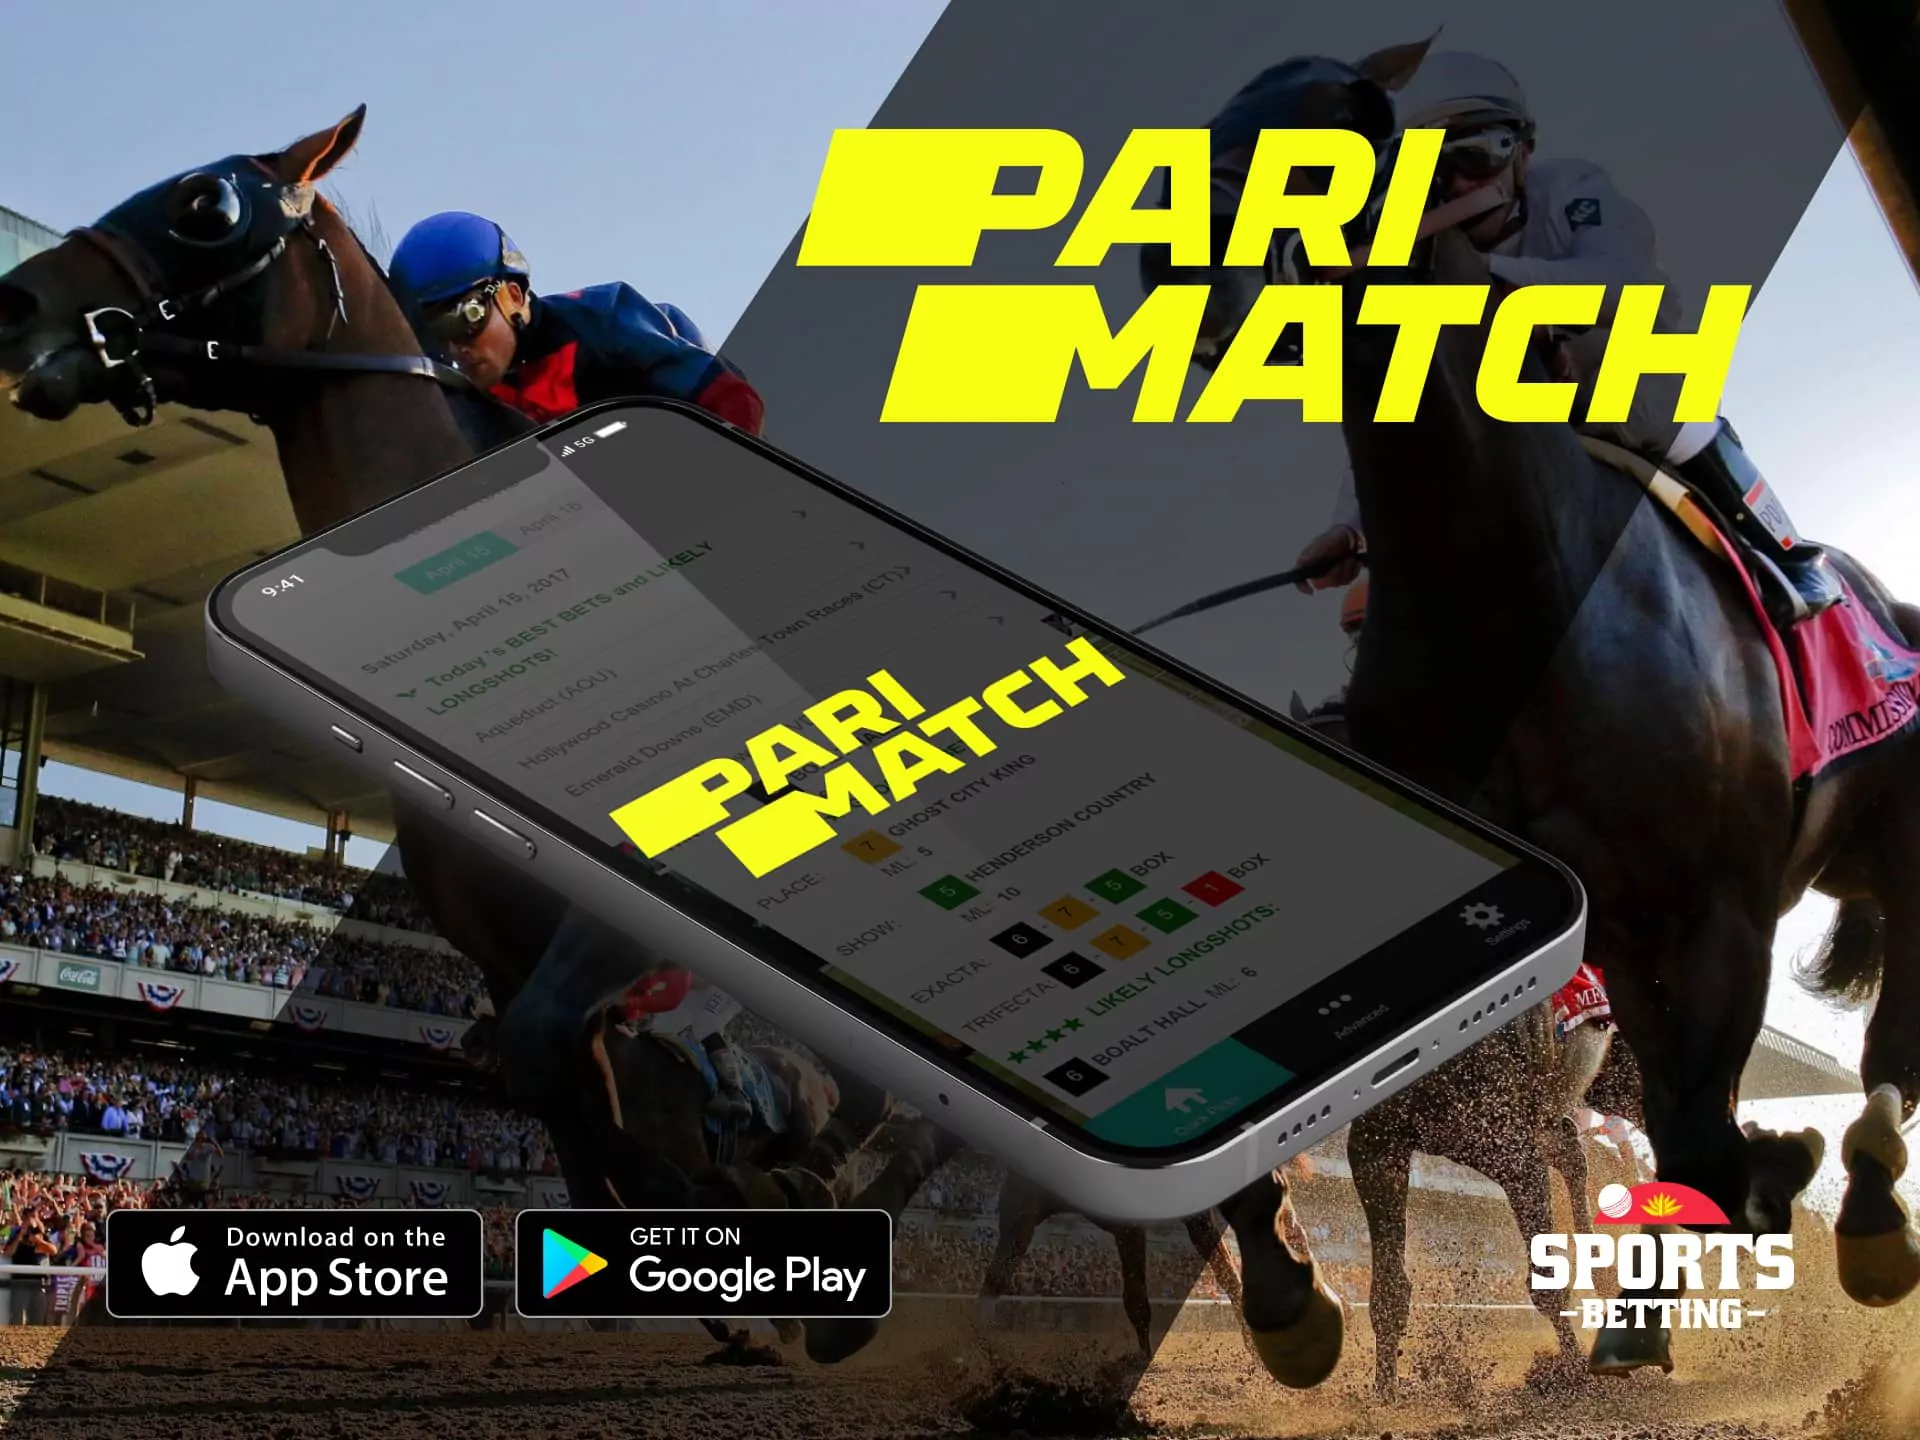 Parimatch horse racing betting site with modern features (cash-out, Loyalty program).